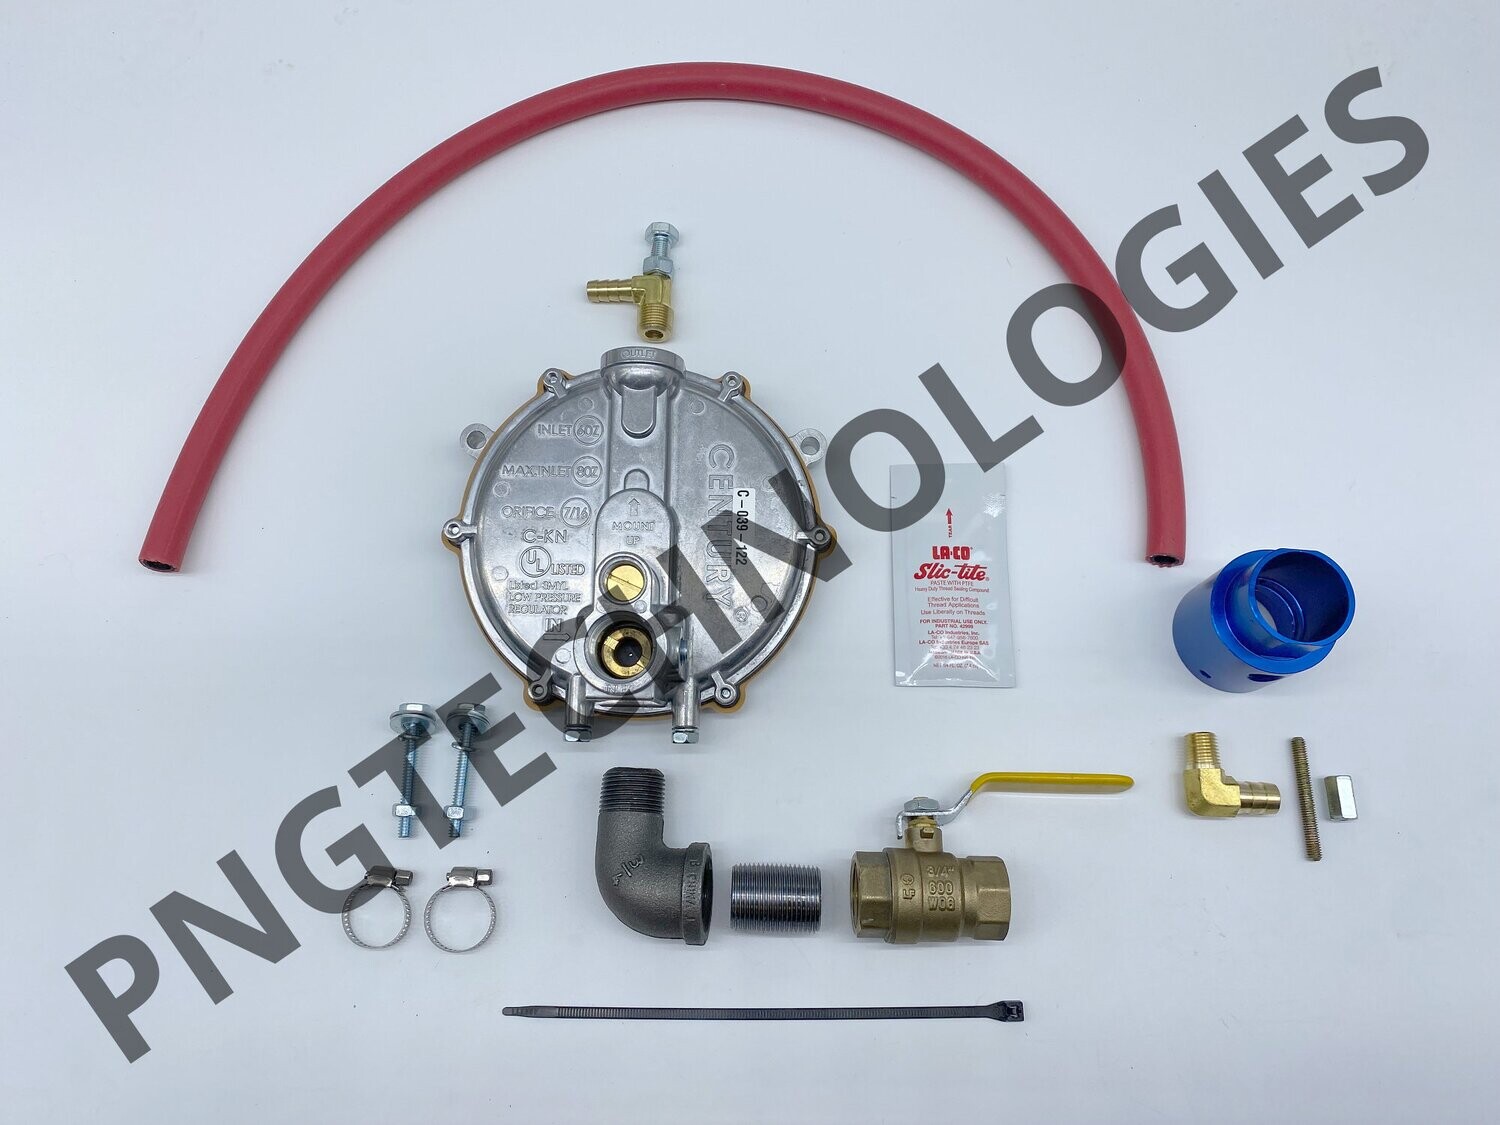 Honda Engine Natural gas kit Engine numbers GX120, GX160 Plus Hose & Quick Connects